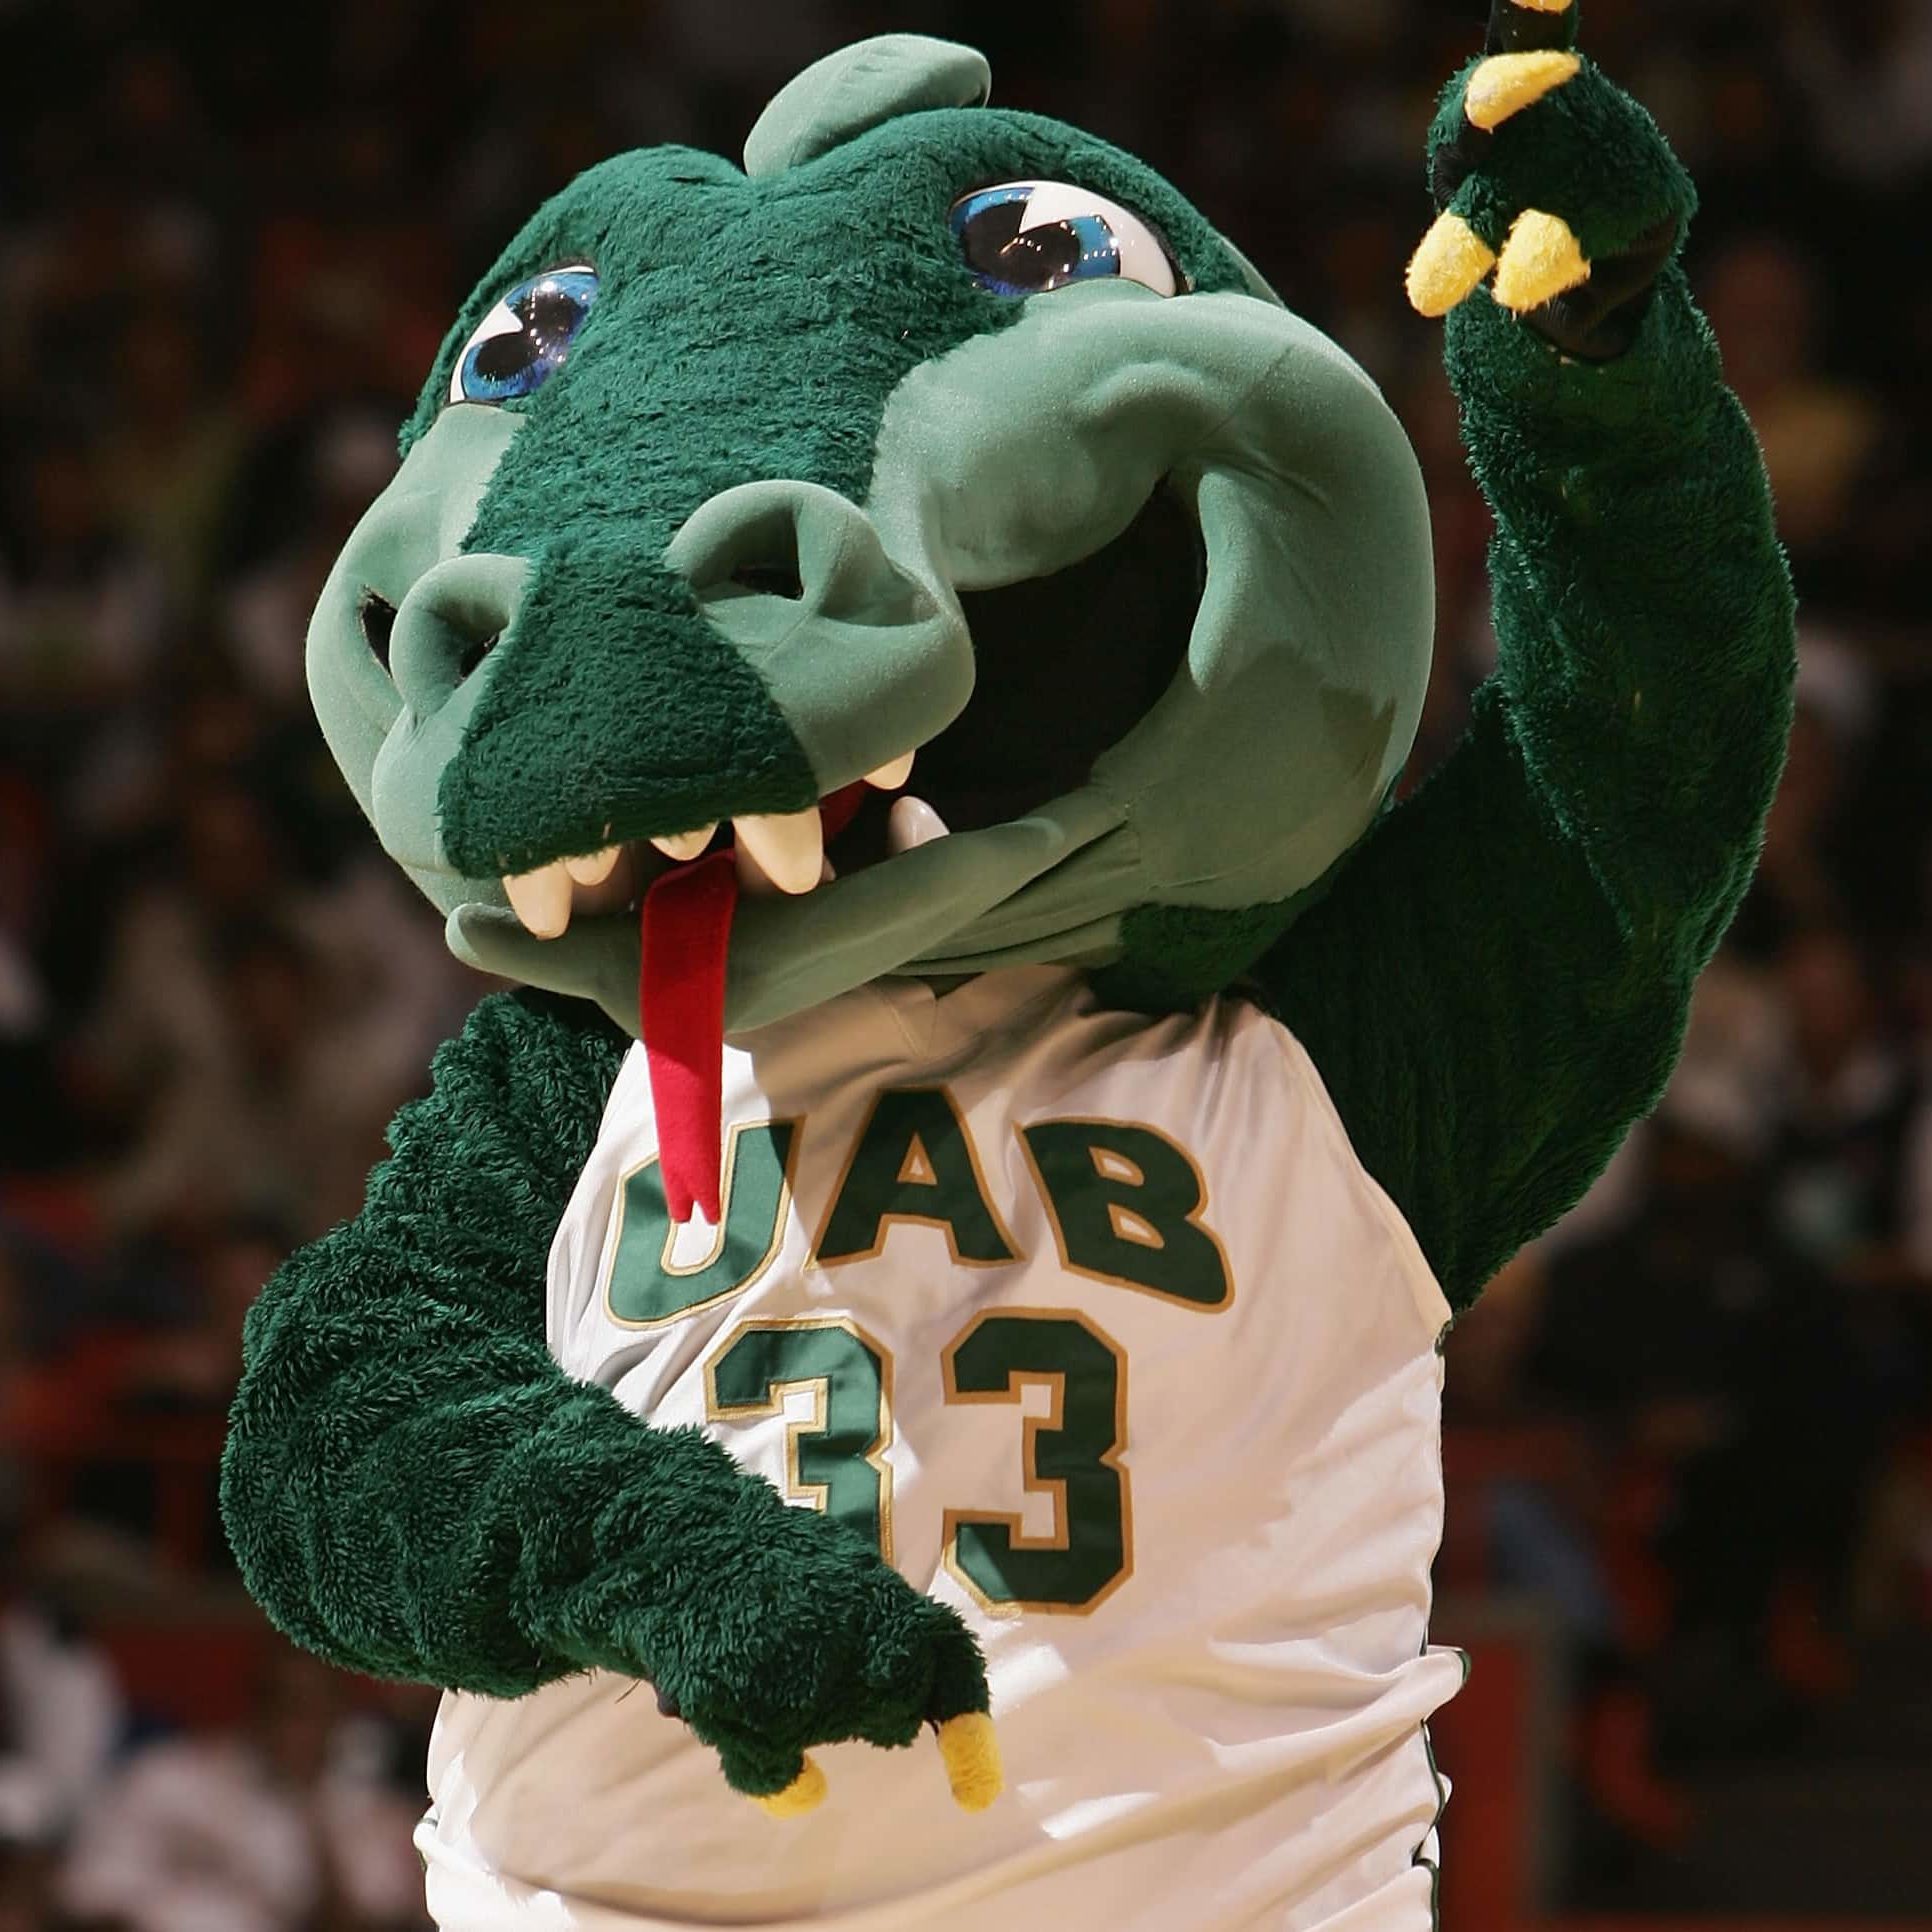 BOISE, ID - MARCH 19: The University of Alabama at Birmingham Blazers mascot performs during a break from the 2005 NCAA division 1 men's basketball championship tournament game against the Arizona Wildcats at Taco Bell Arena on March 19, 2005 in Boise, Idaho.   (Photo by Jonathan Ferrey/Getty Images)